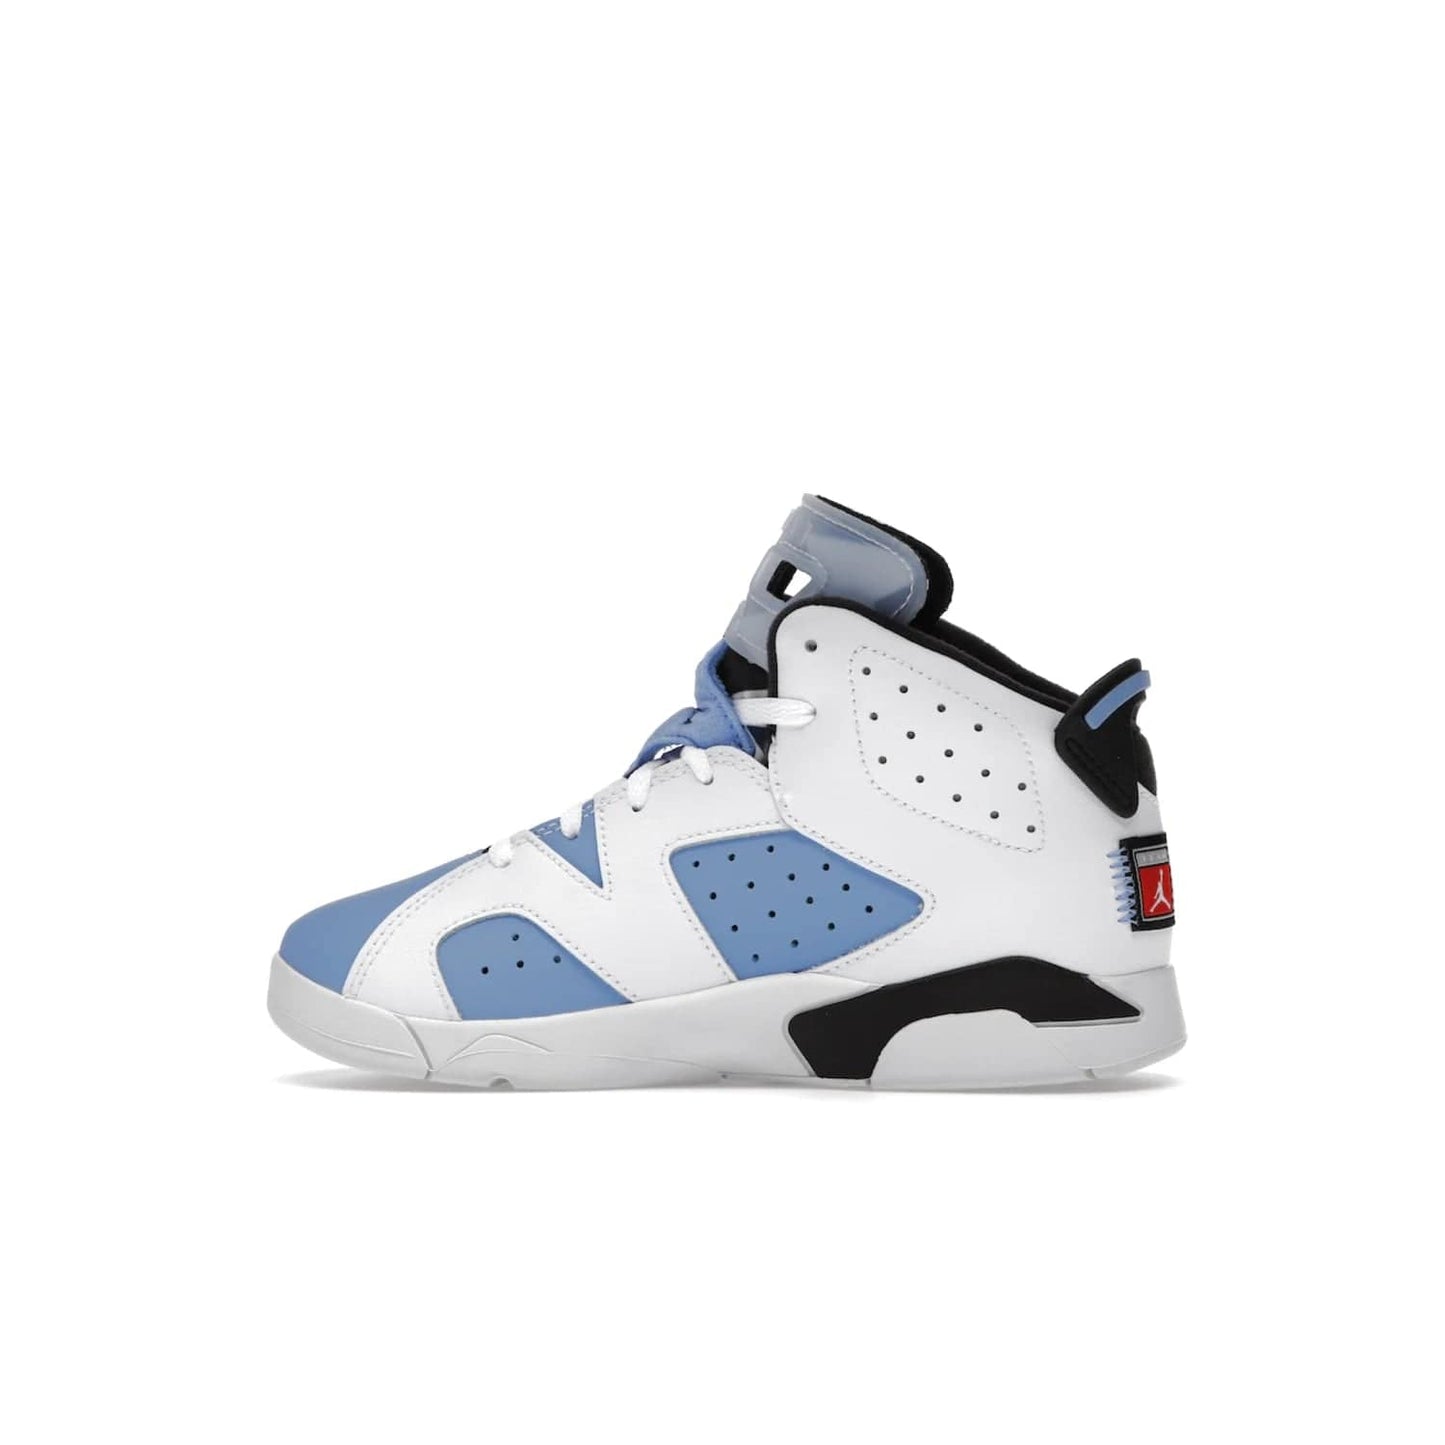 Jordan 6 Retro UNC White (PS) - Image 20 - Only at www.BallersClubKickz.com - The Air Jordan 6 Retro UNC White PS celebrates Michael Jordan's alma mater, the University of North Carolina. It features a classic color-blocking of the iconic Jordan 6 Carmine and a stitched Jordan Team patch. This must-have sneaker released on April 27th, 2022. Referencing the university colors, get this shoe for a stylish and timeless style with university pride.